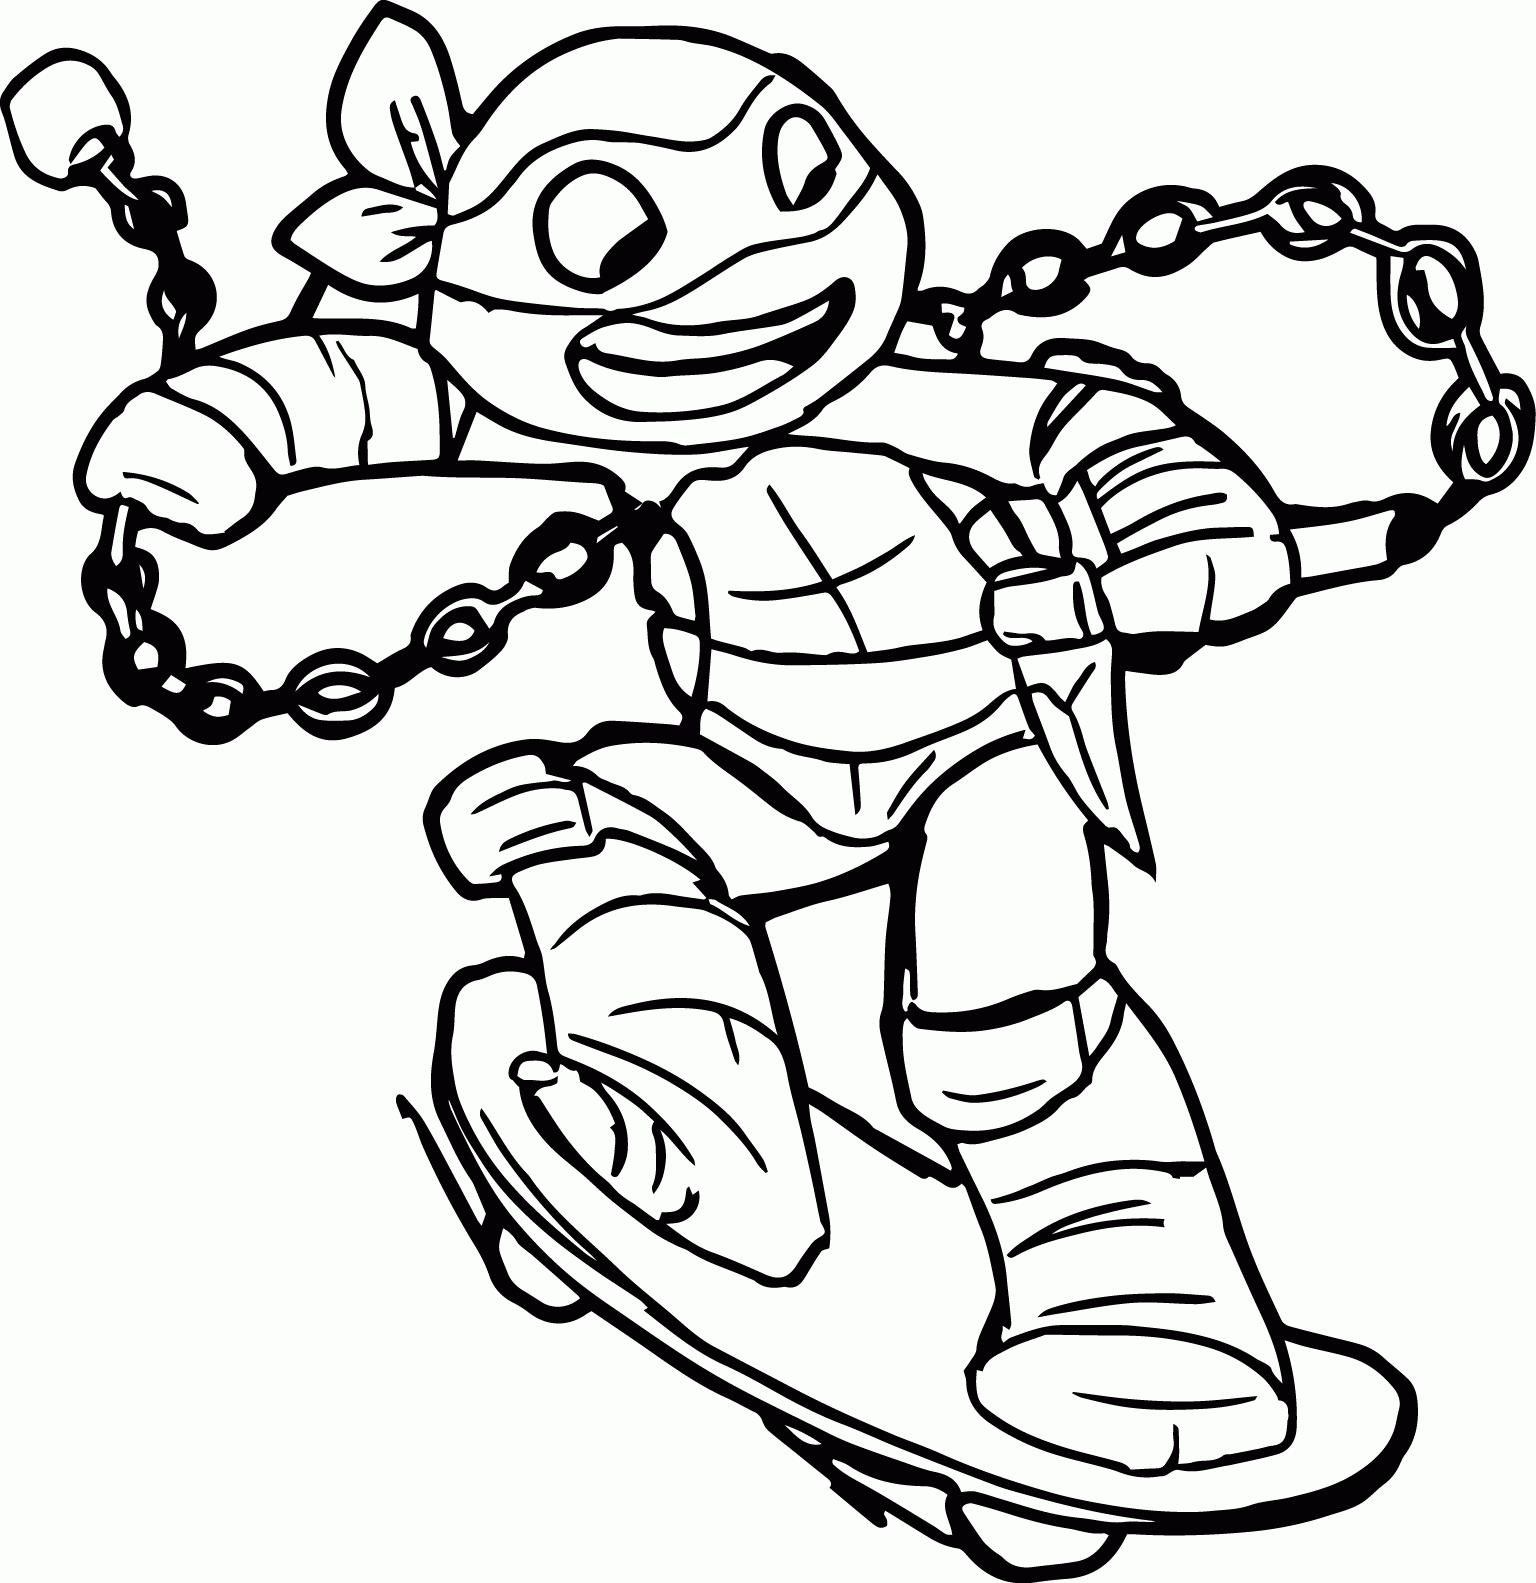 Free Printable Ninja Turtle Coloring Pages Beautiful - Coloring pages